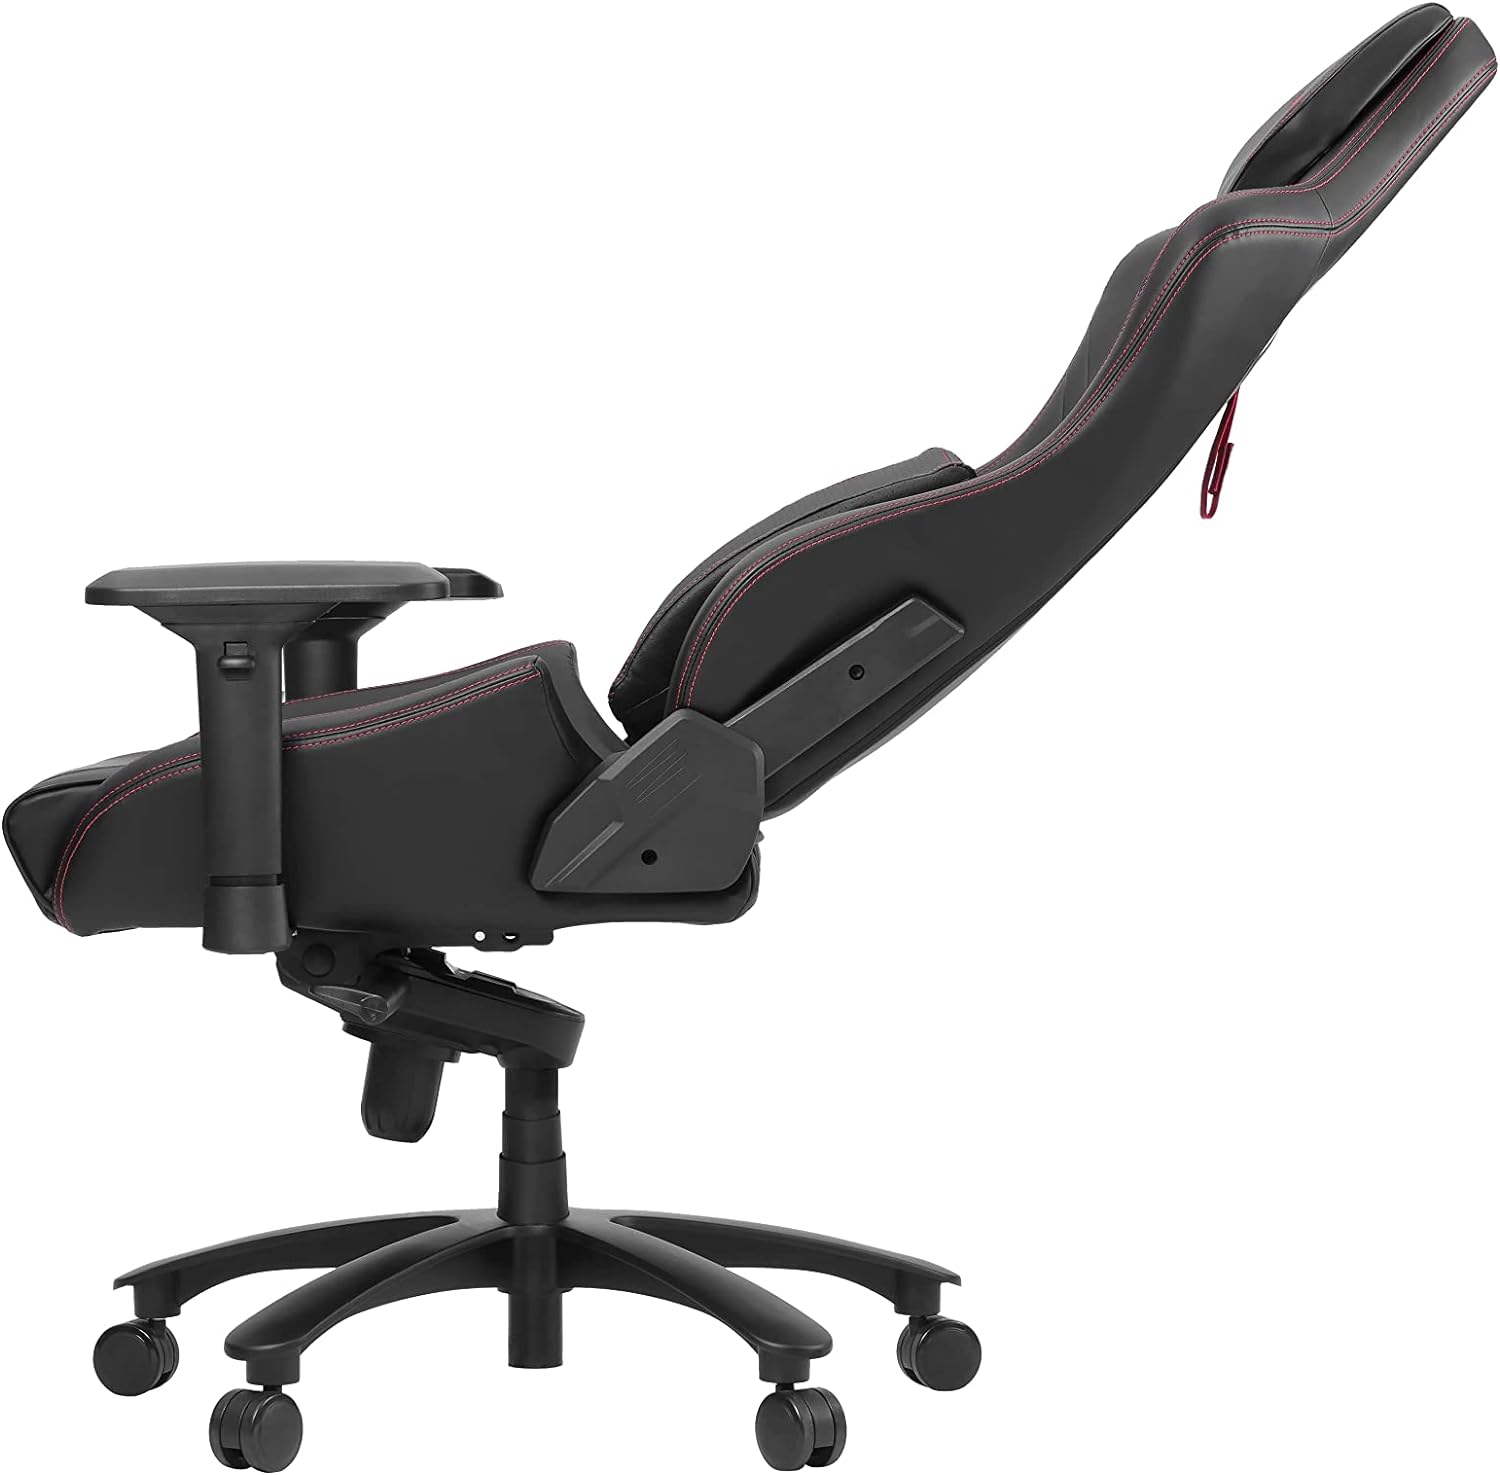 ASUS ROG Chariot Core Gaming Chair with memory foam headrest for customizable positioning. 4718017322782